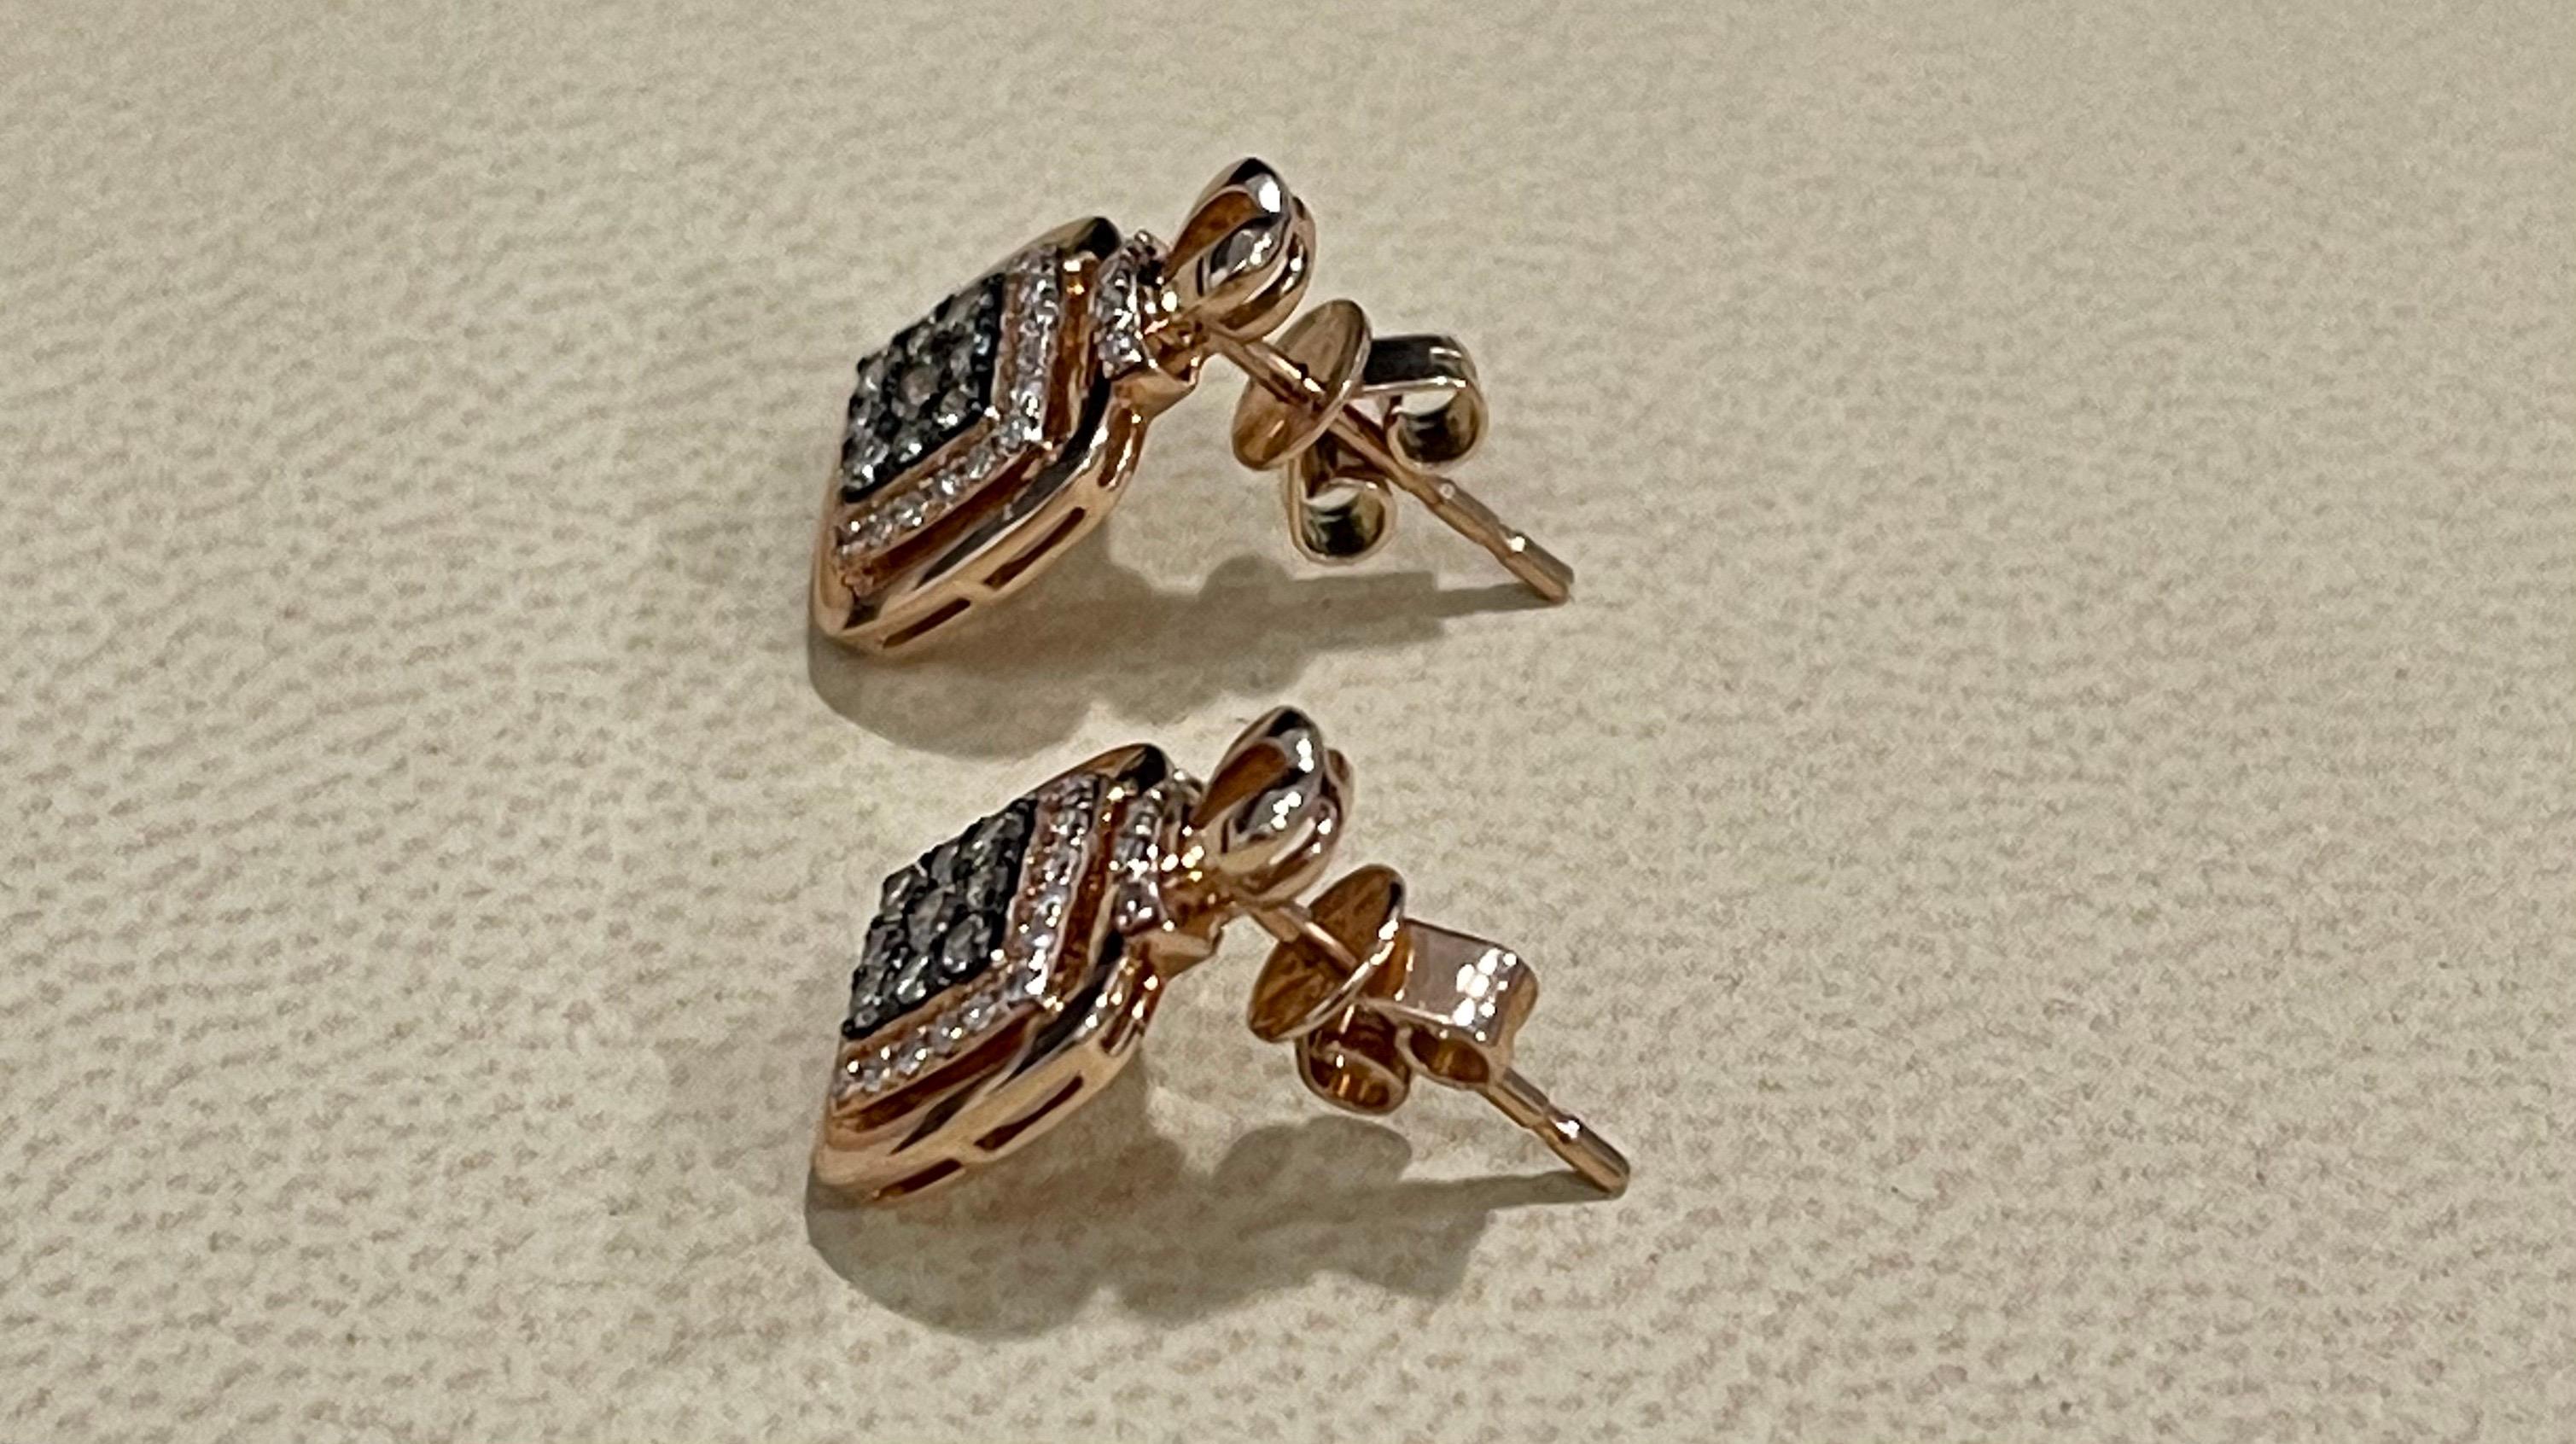 
Designer Effy's 0.36Carat Expresso Diamond Square  Stud Earrings 14 Karat  Rose Gold
Post  back earring
This exquisite pair of earrings are beautifully crafted with 14 karat Rose gold .
Weight of 14 K gold 3.5 grams
64  pieces  Diamonds of